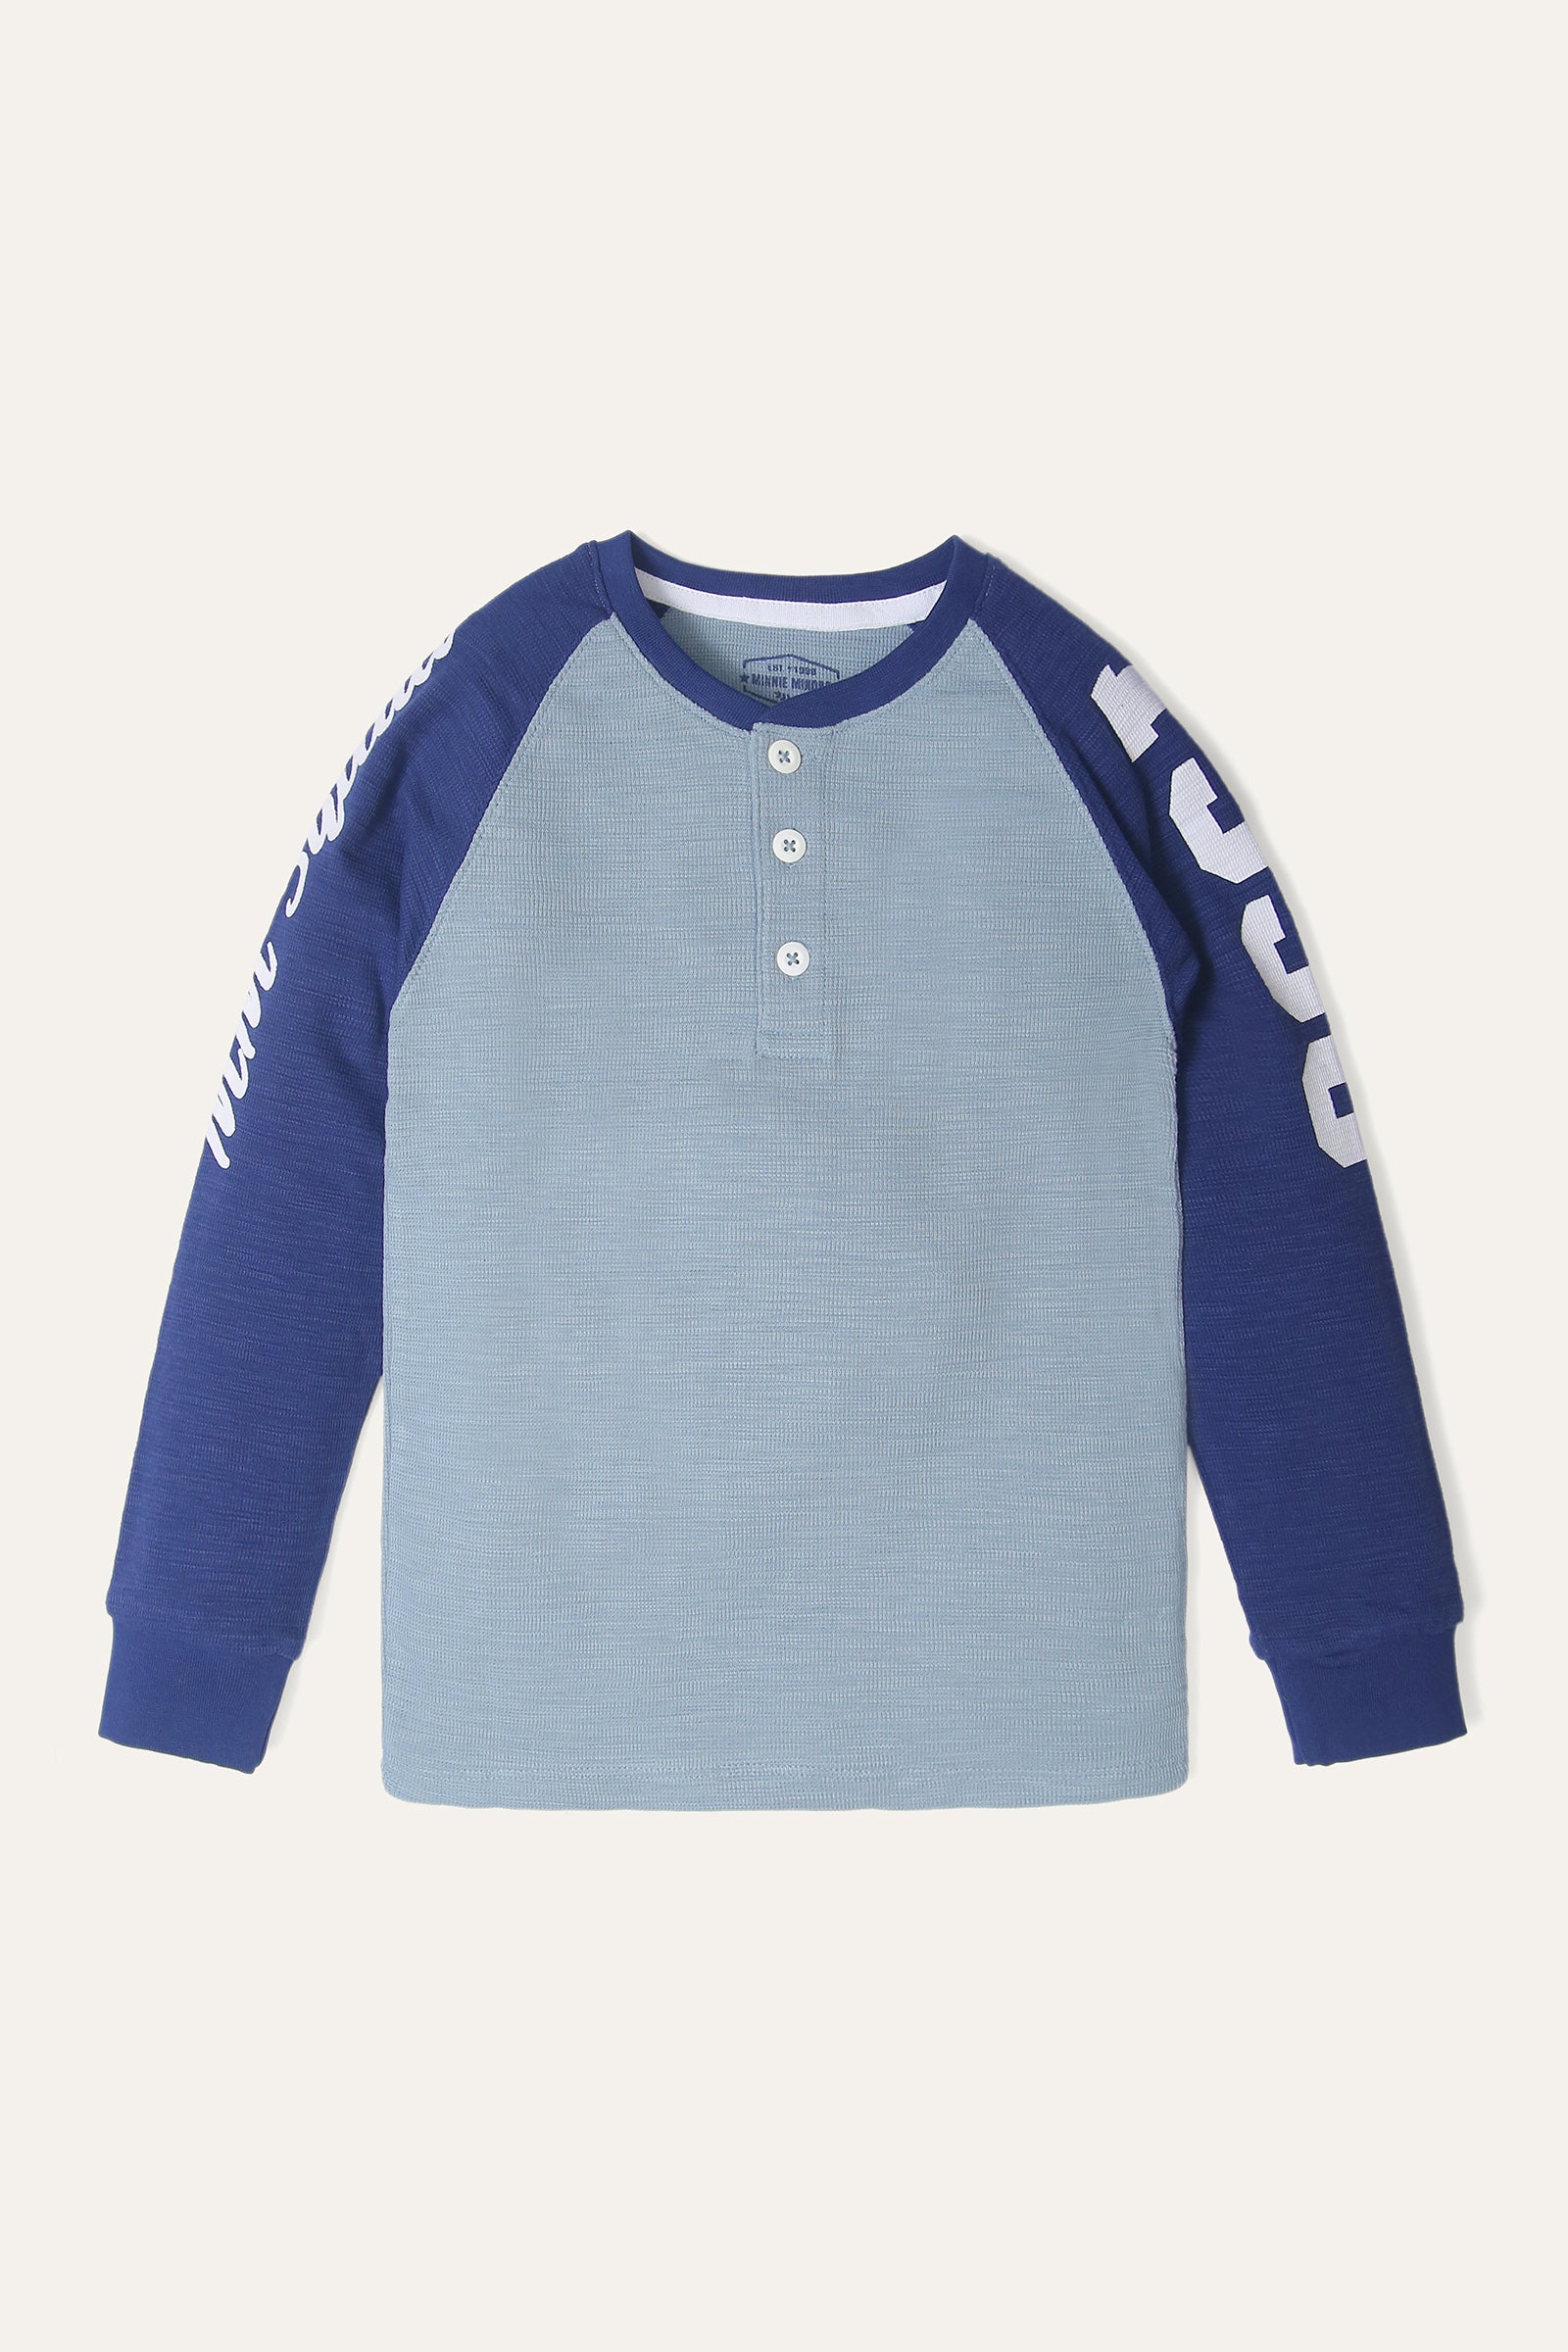 Shop Boys T-Shirts, Baby Rompers & Thermal Wear